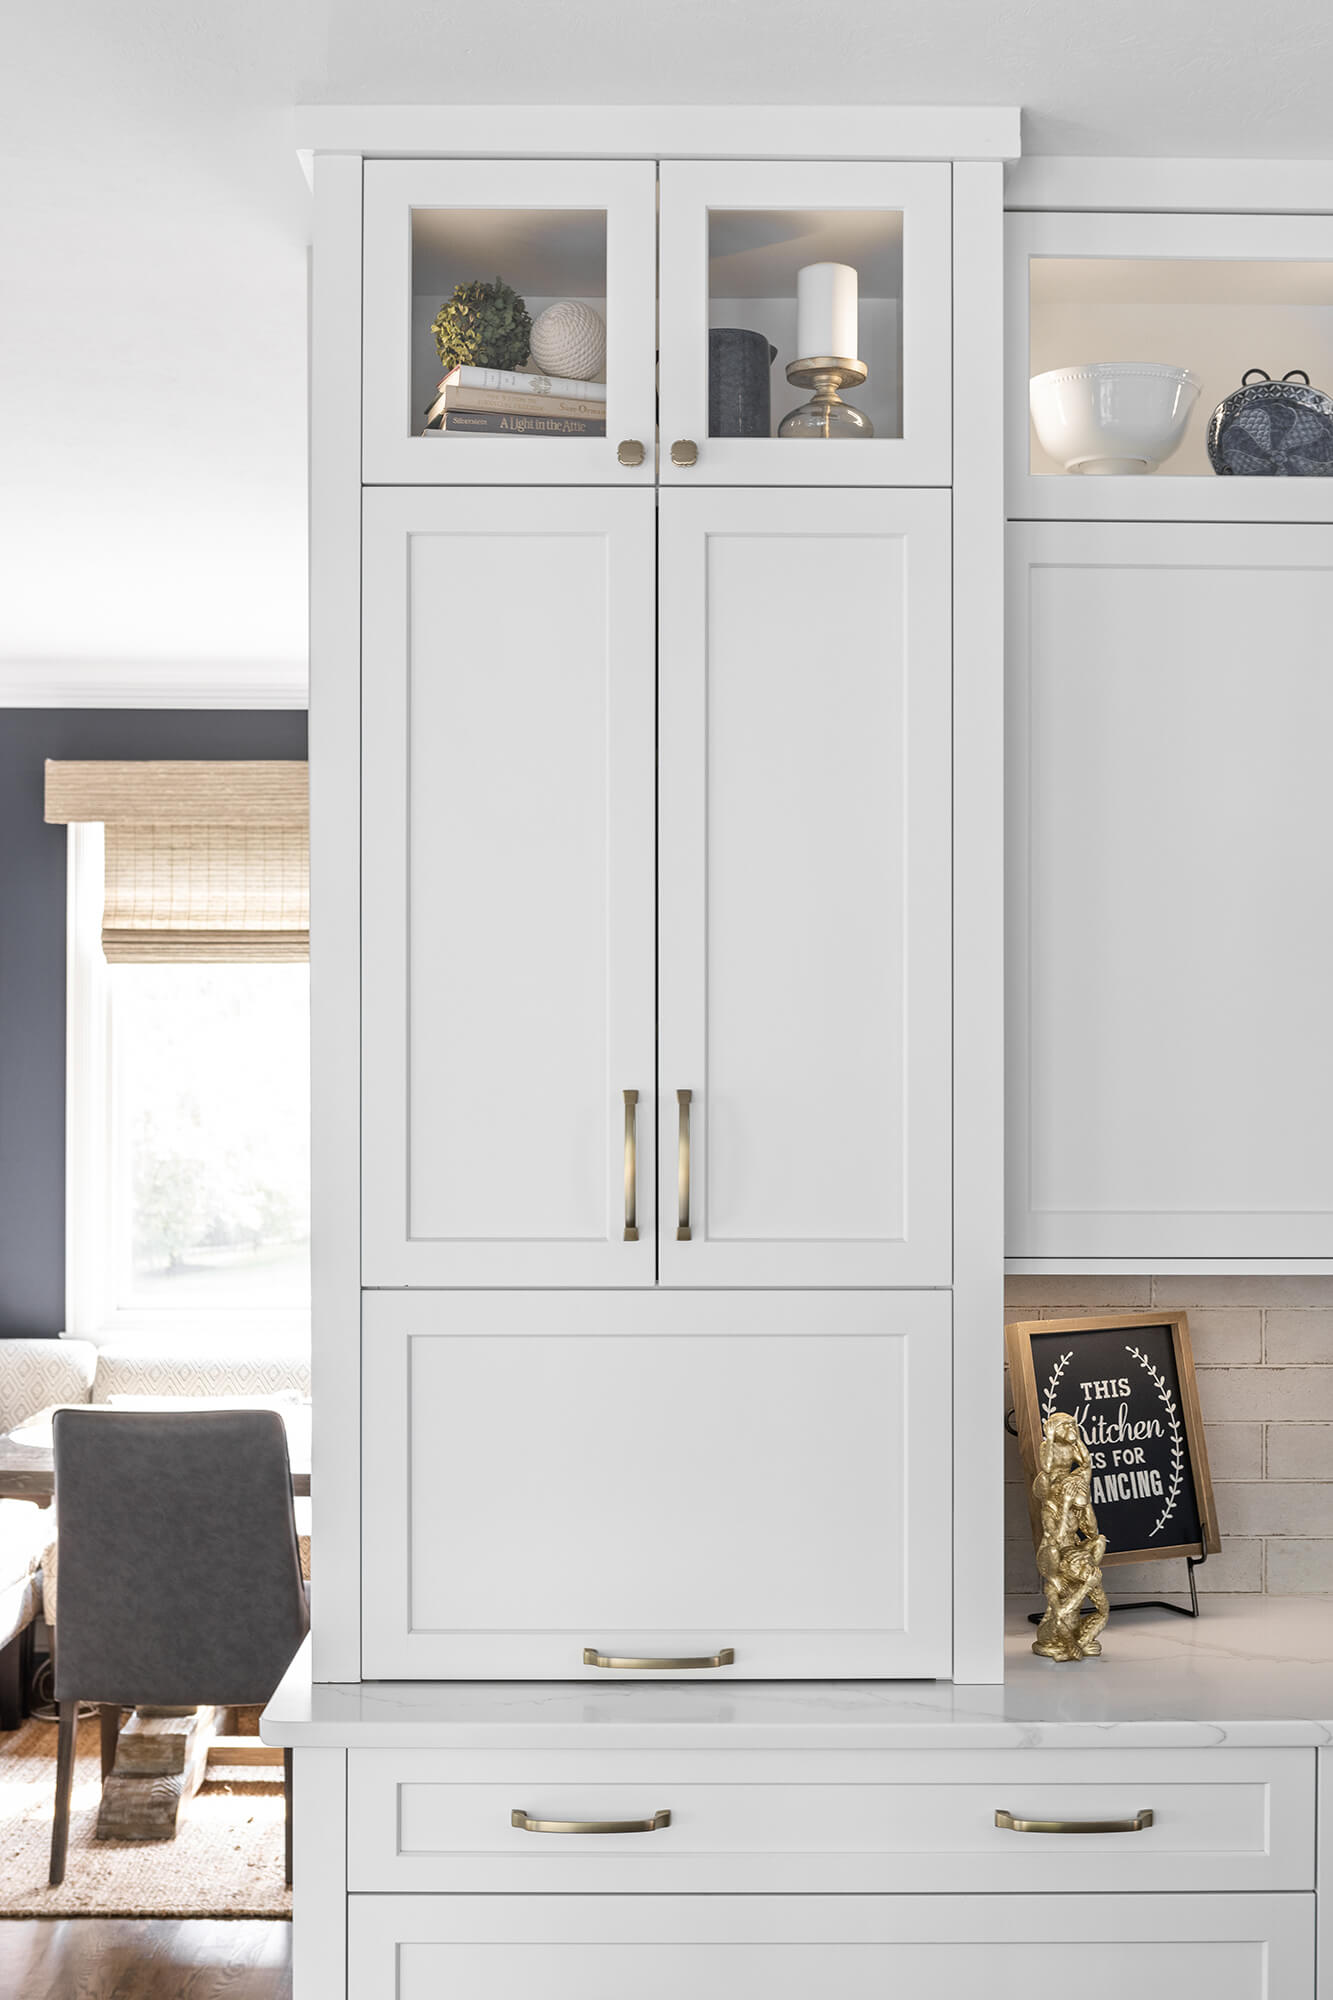 A closed white painted cabinet sitting at countertop height that hides several kitchen appliances behind closed doors. Shown here in the closed position.